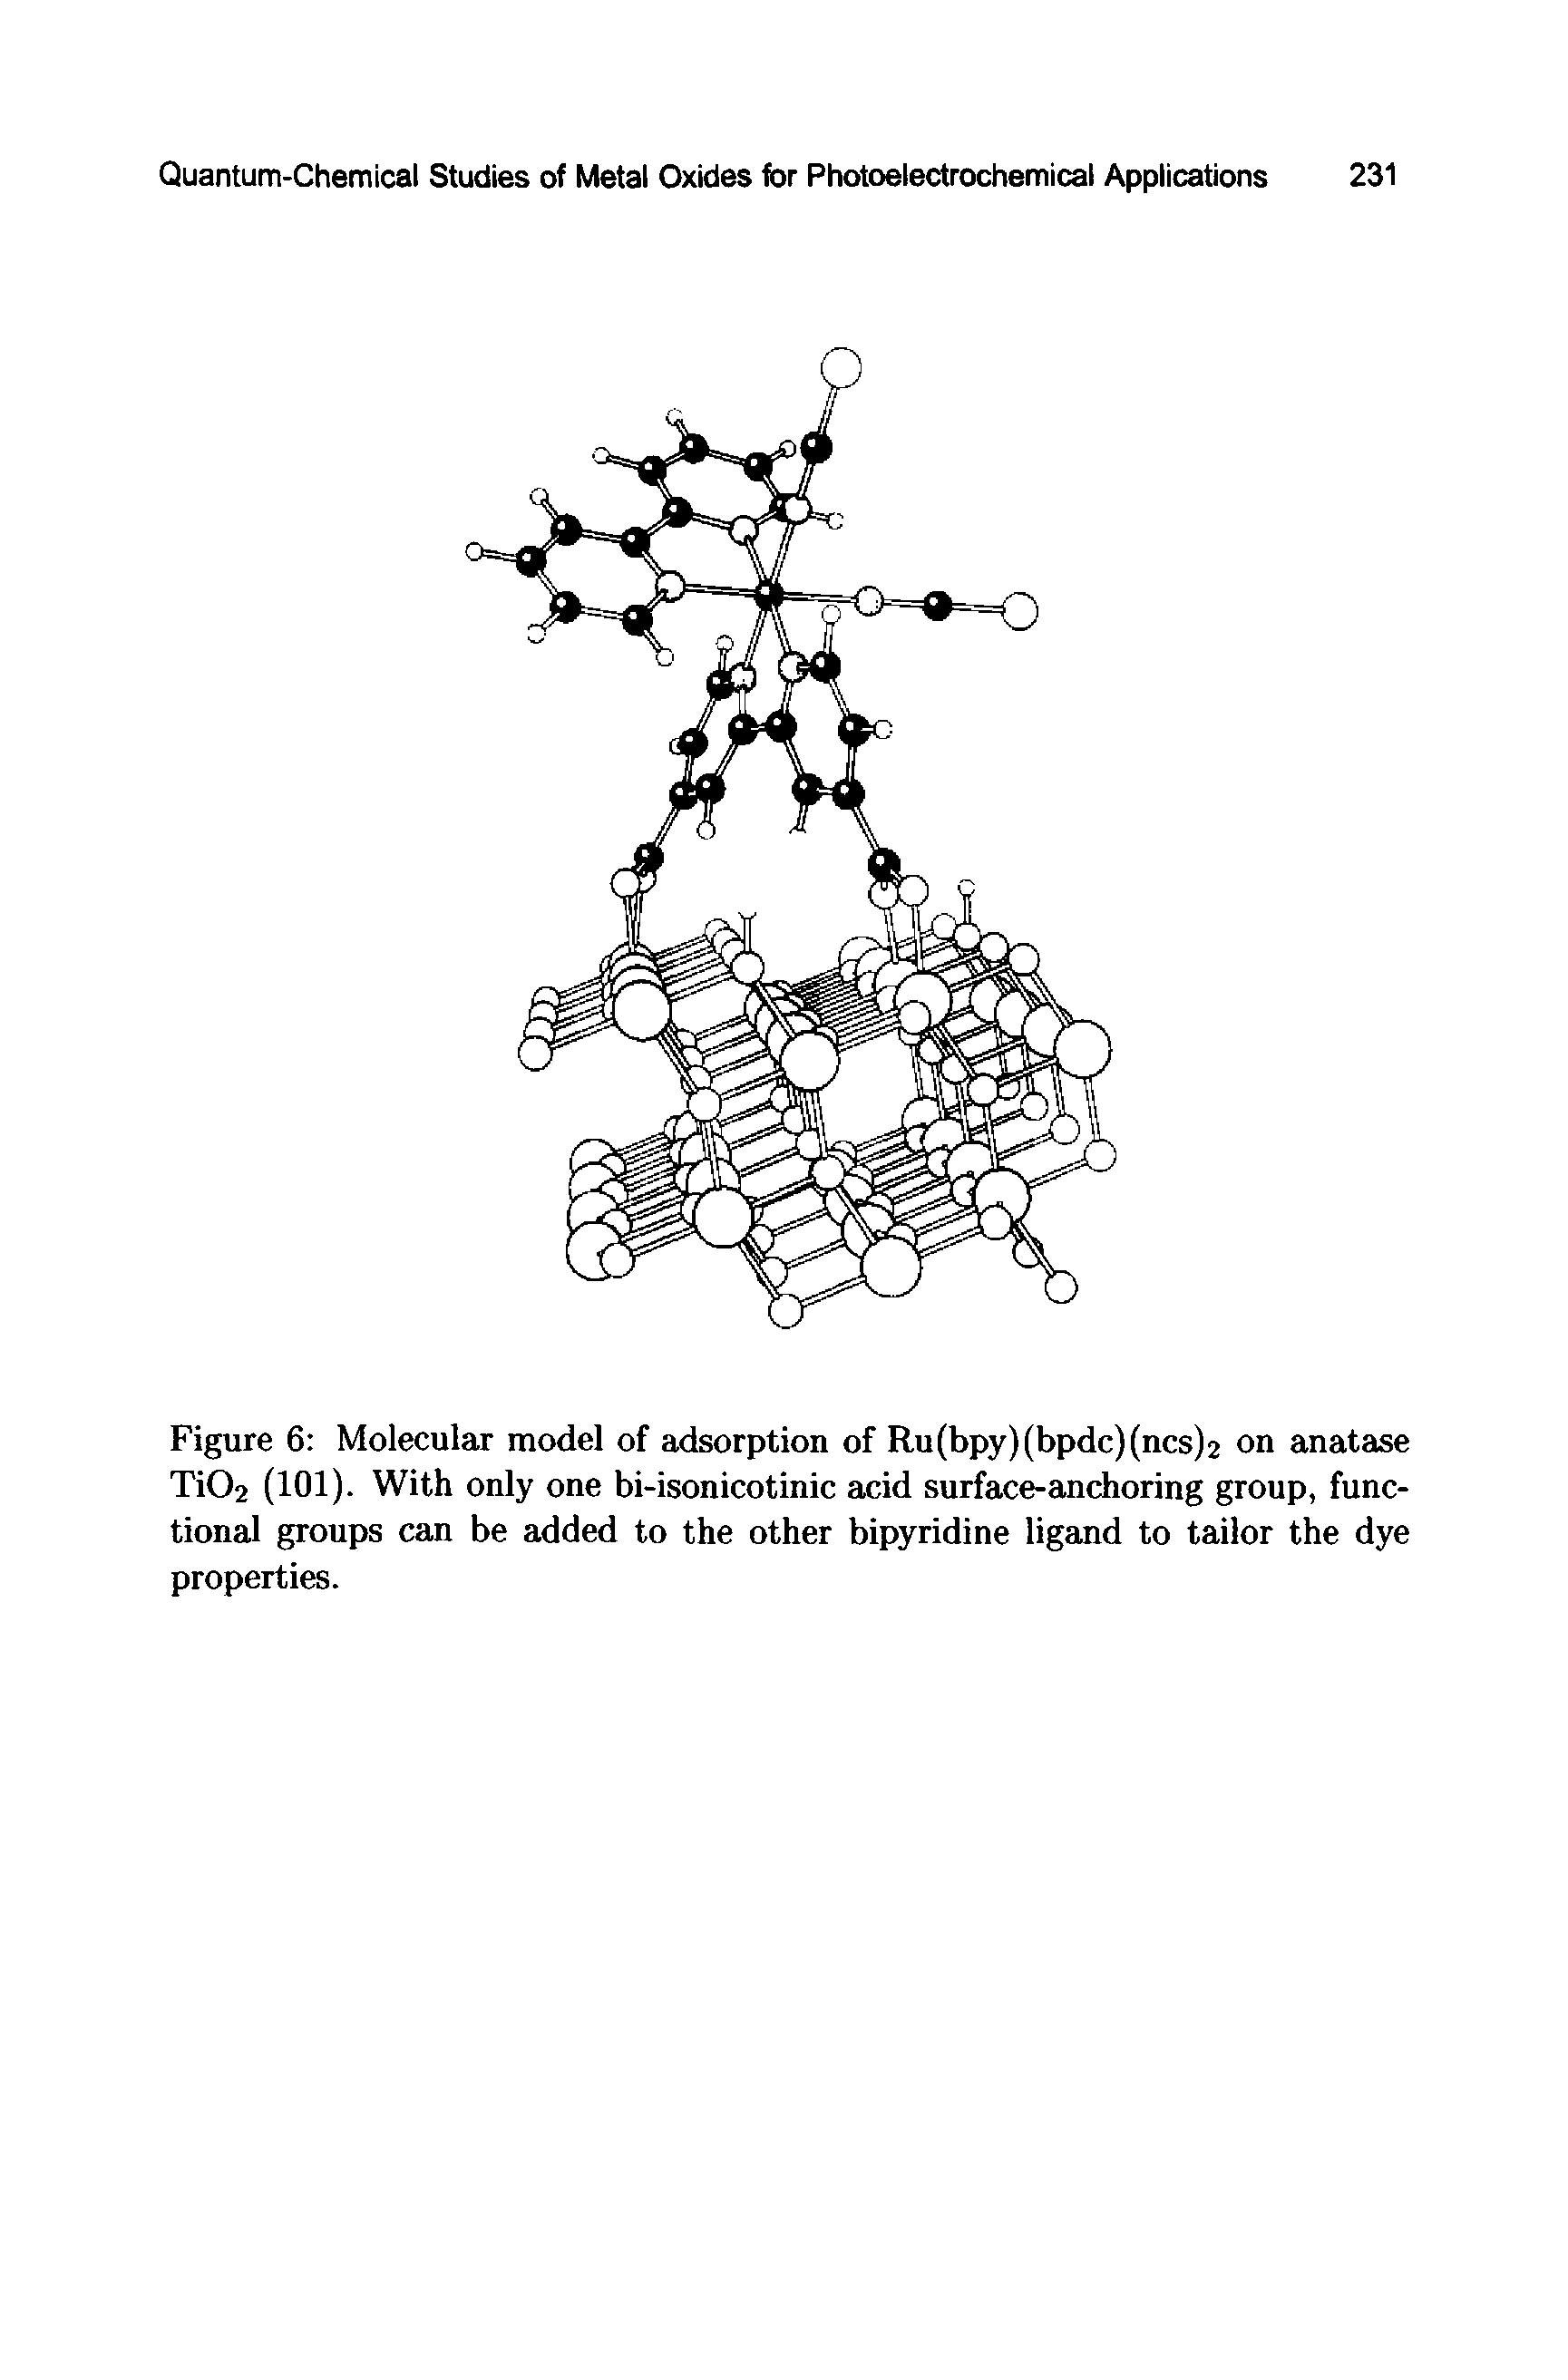 Figure 6 Molecular model of adsorption of Ru(bpy)(bpdc)(ncs)2 on anatase Ti02 (101). With only one bi-isonicotinic acid surface-anchoring group, functional groups can be added to the other bipyridine ligand to tailor the dye properties.